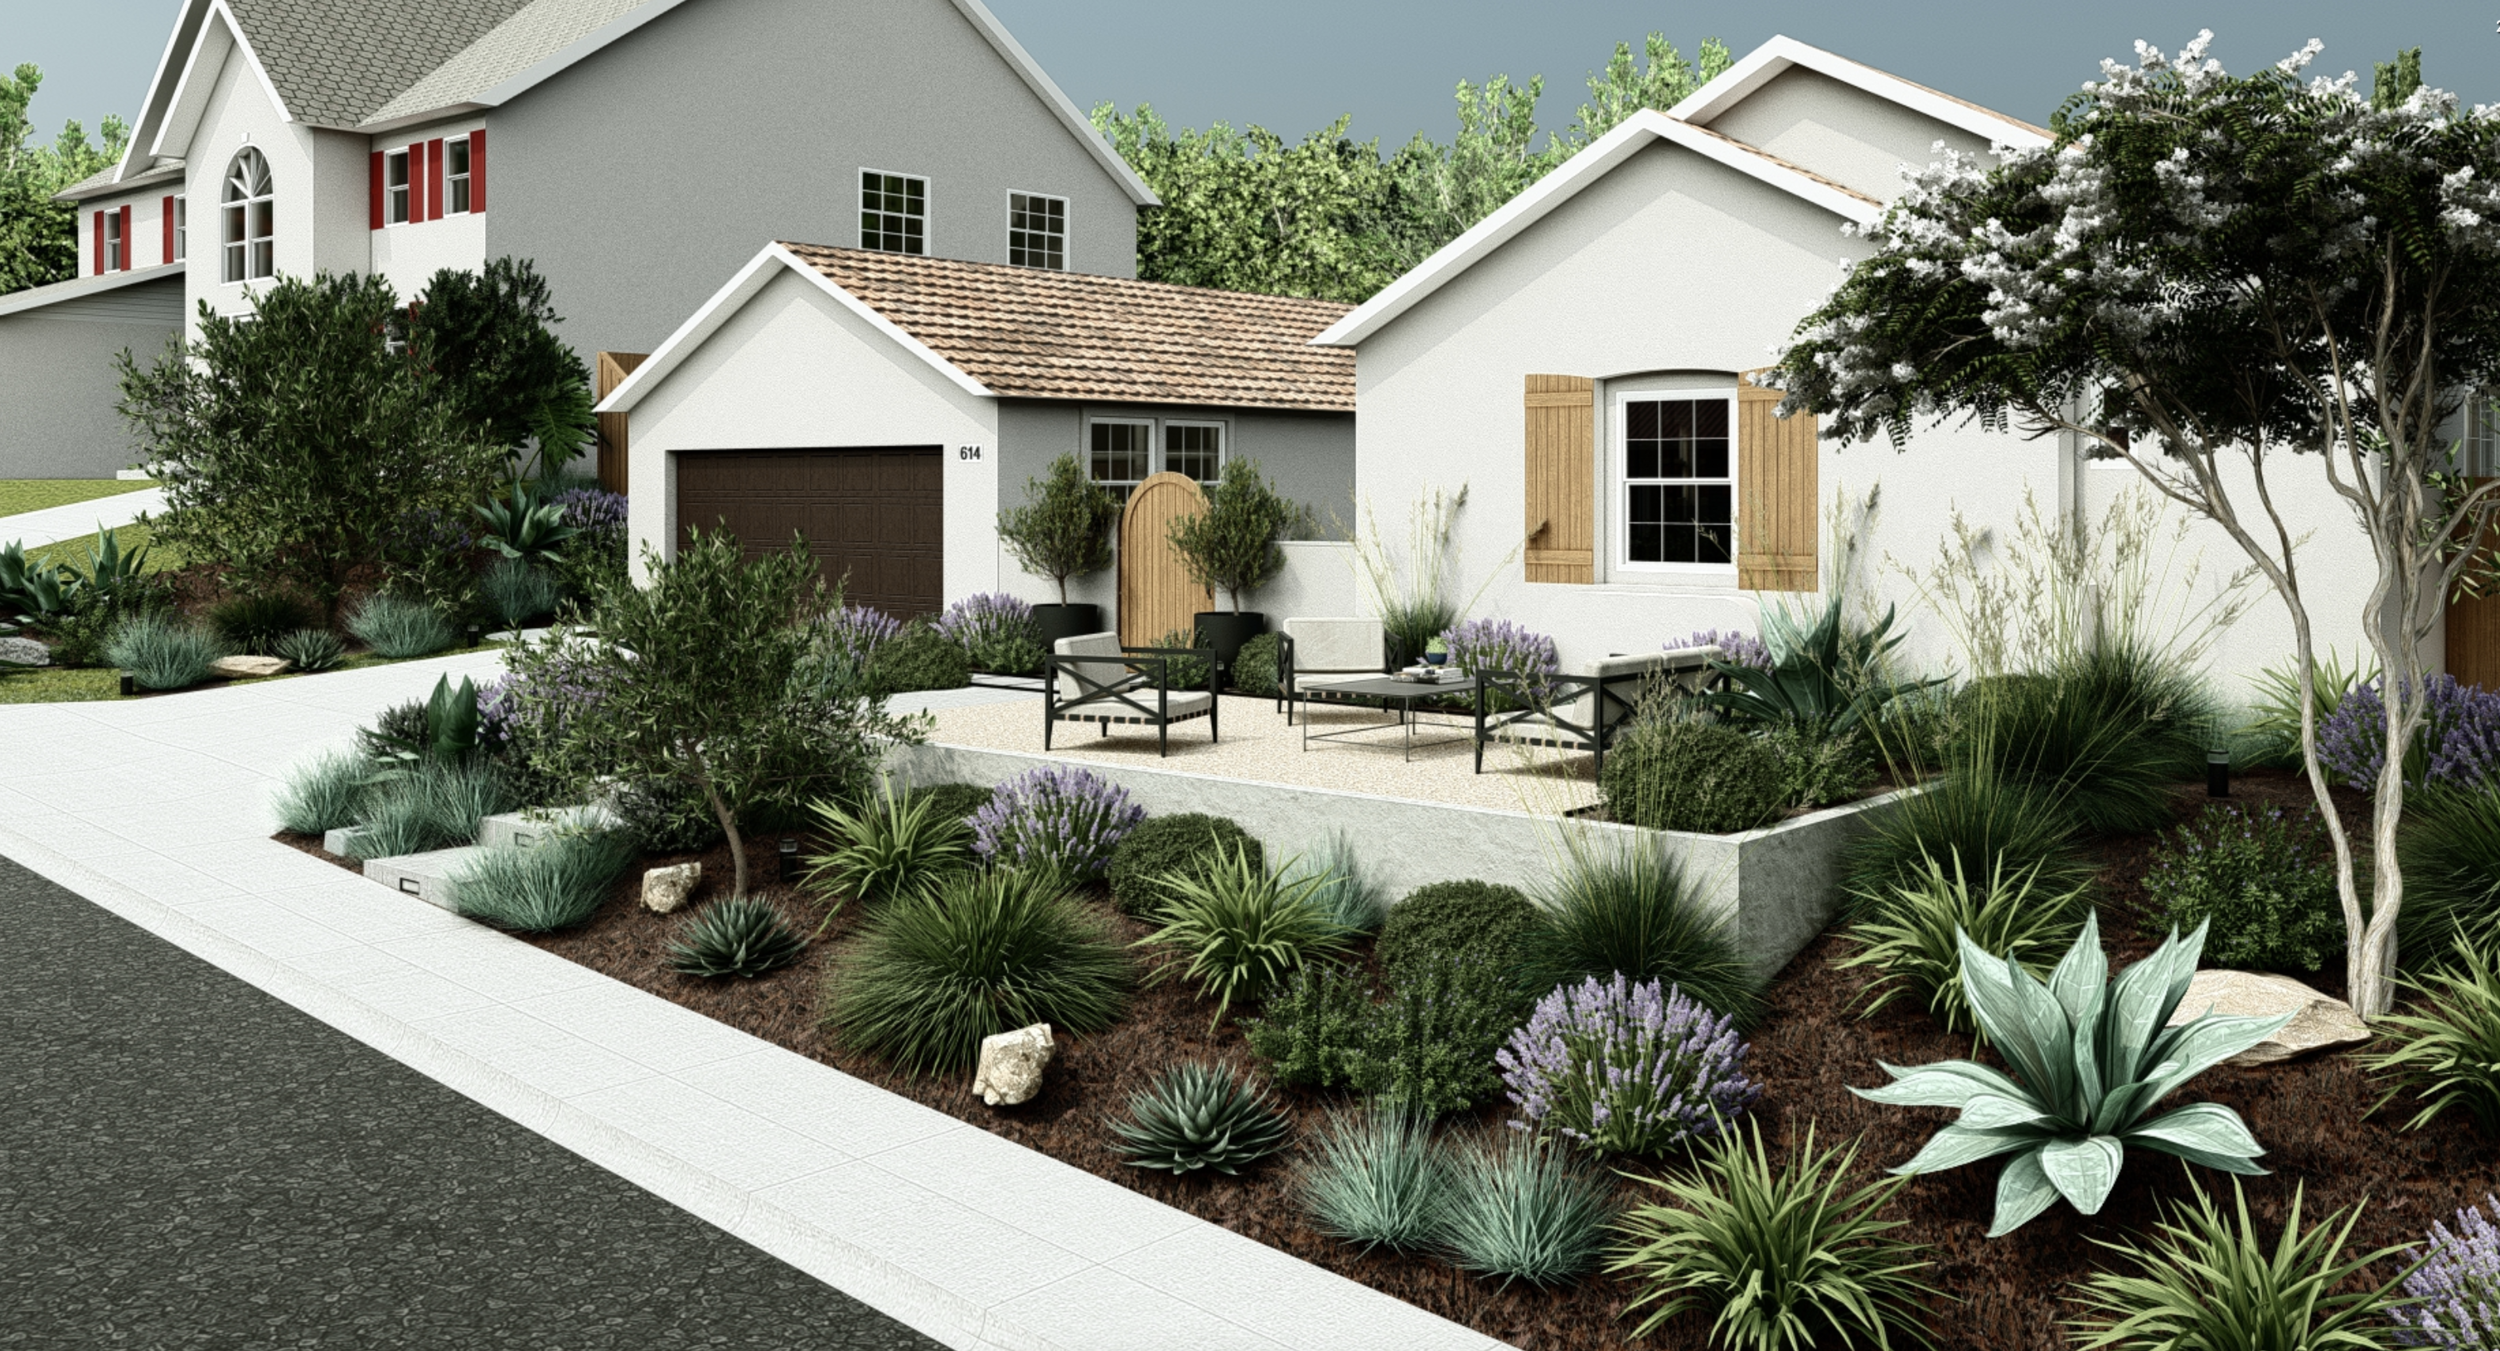 A social front yard with mulch and ornamental plants on it